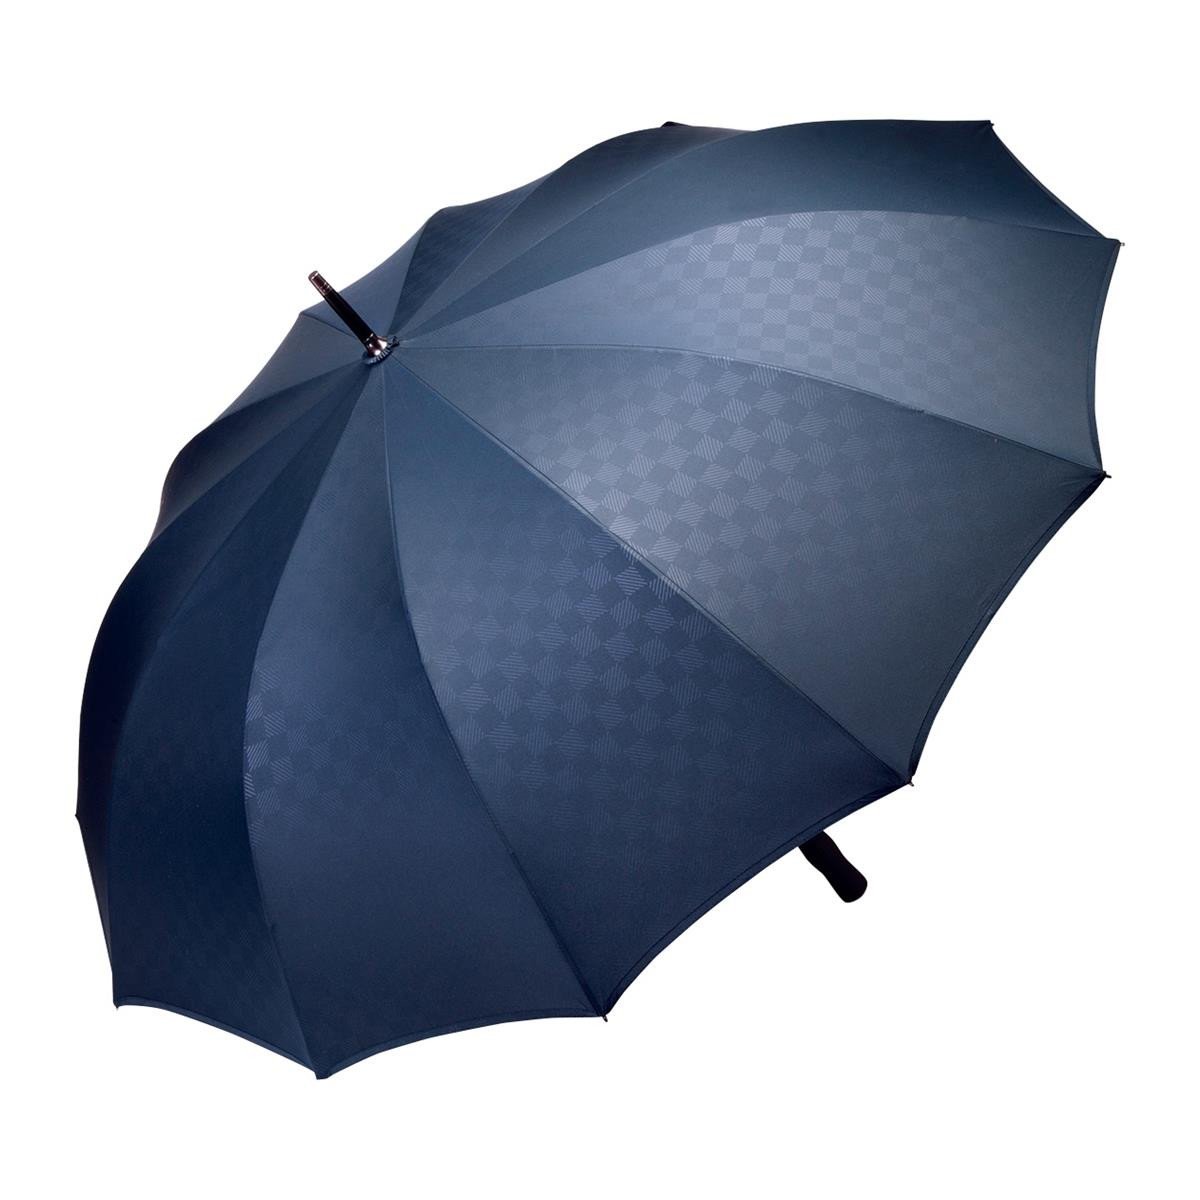 UMBRA®️ BOSS Embossed Checkered Pattern Umbrella with Black Electroplated Steel Shaft  - Auto-Open Push Button Feature